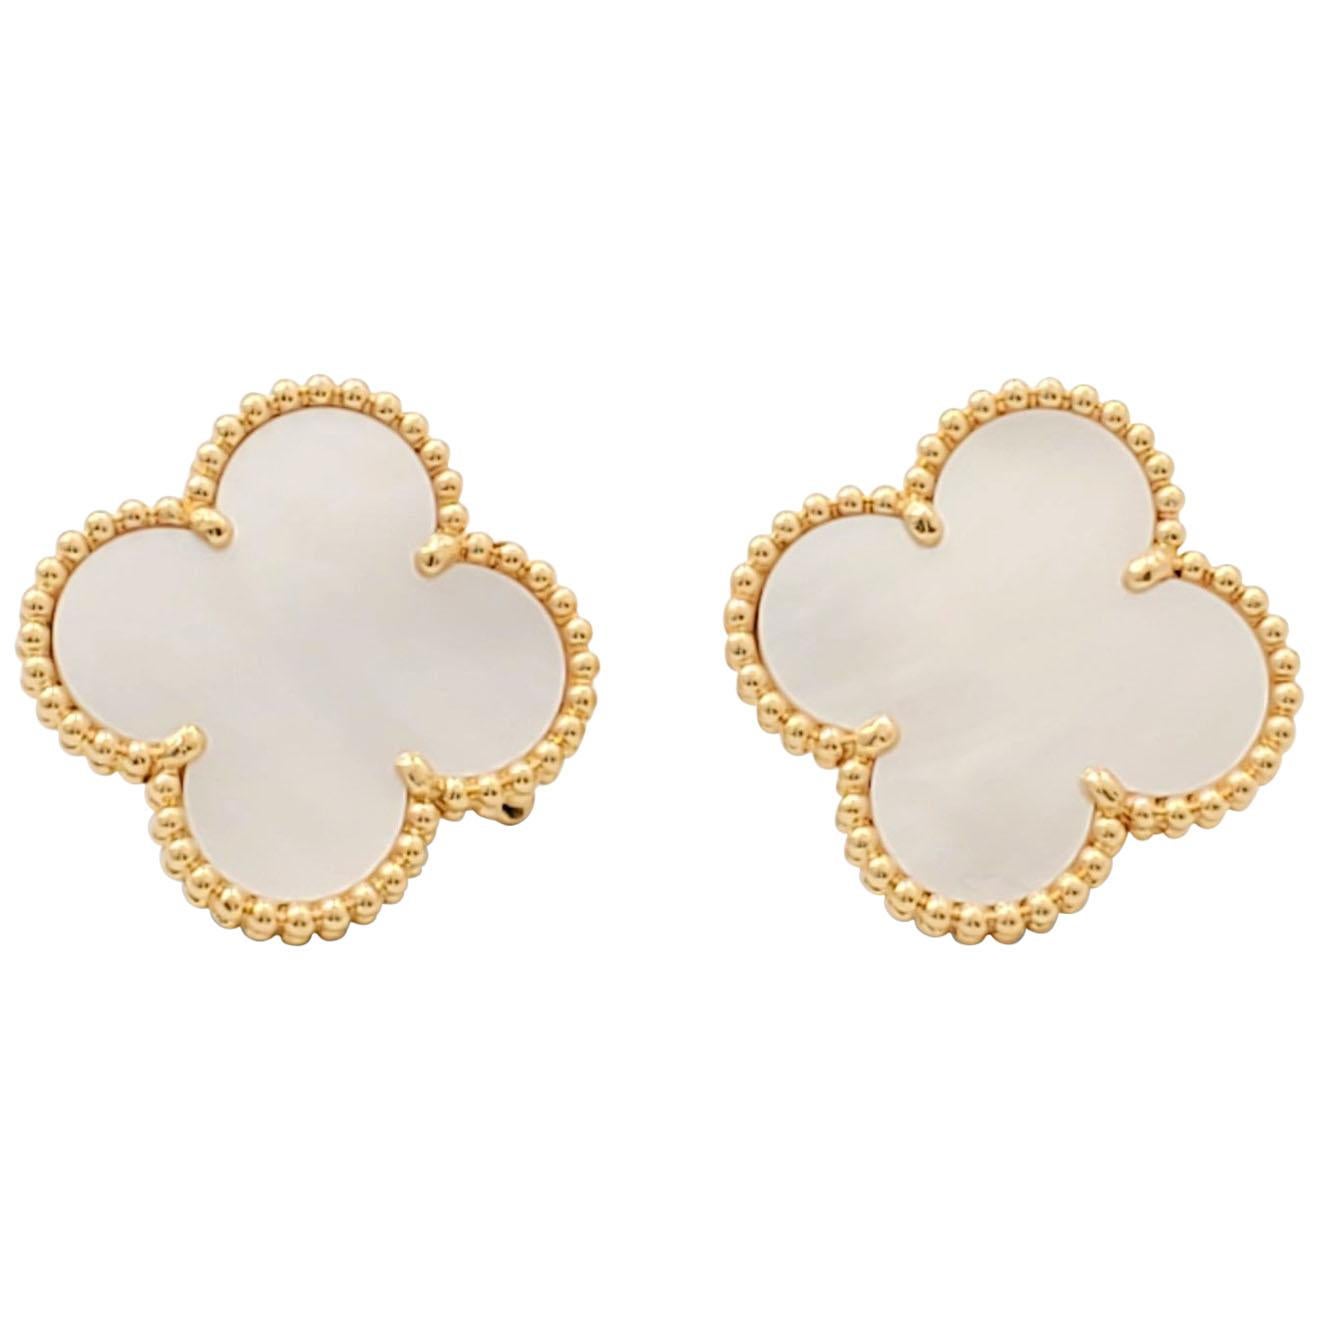 Van Cleef & Arpels 'Magic Alhambra' Gold and Mother of Pearl Earrings